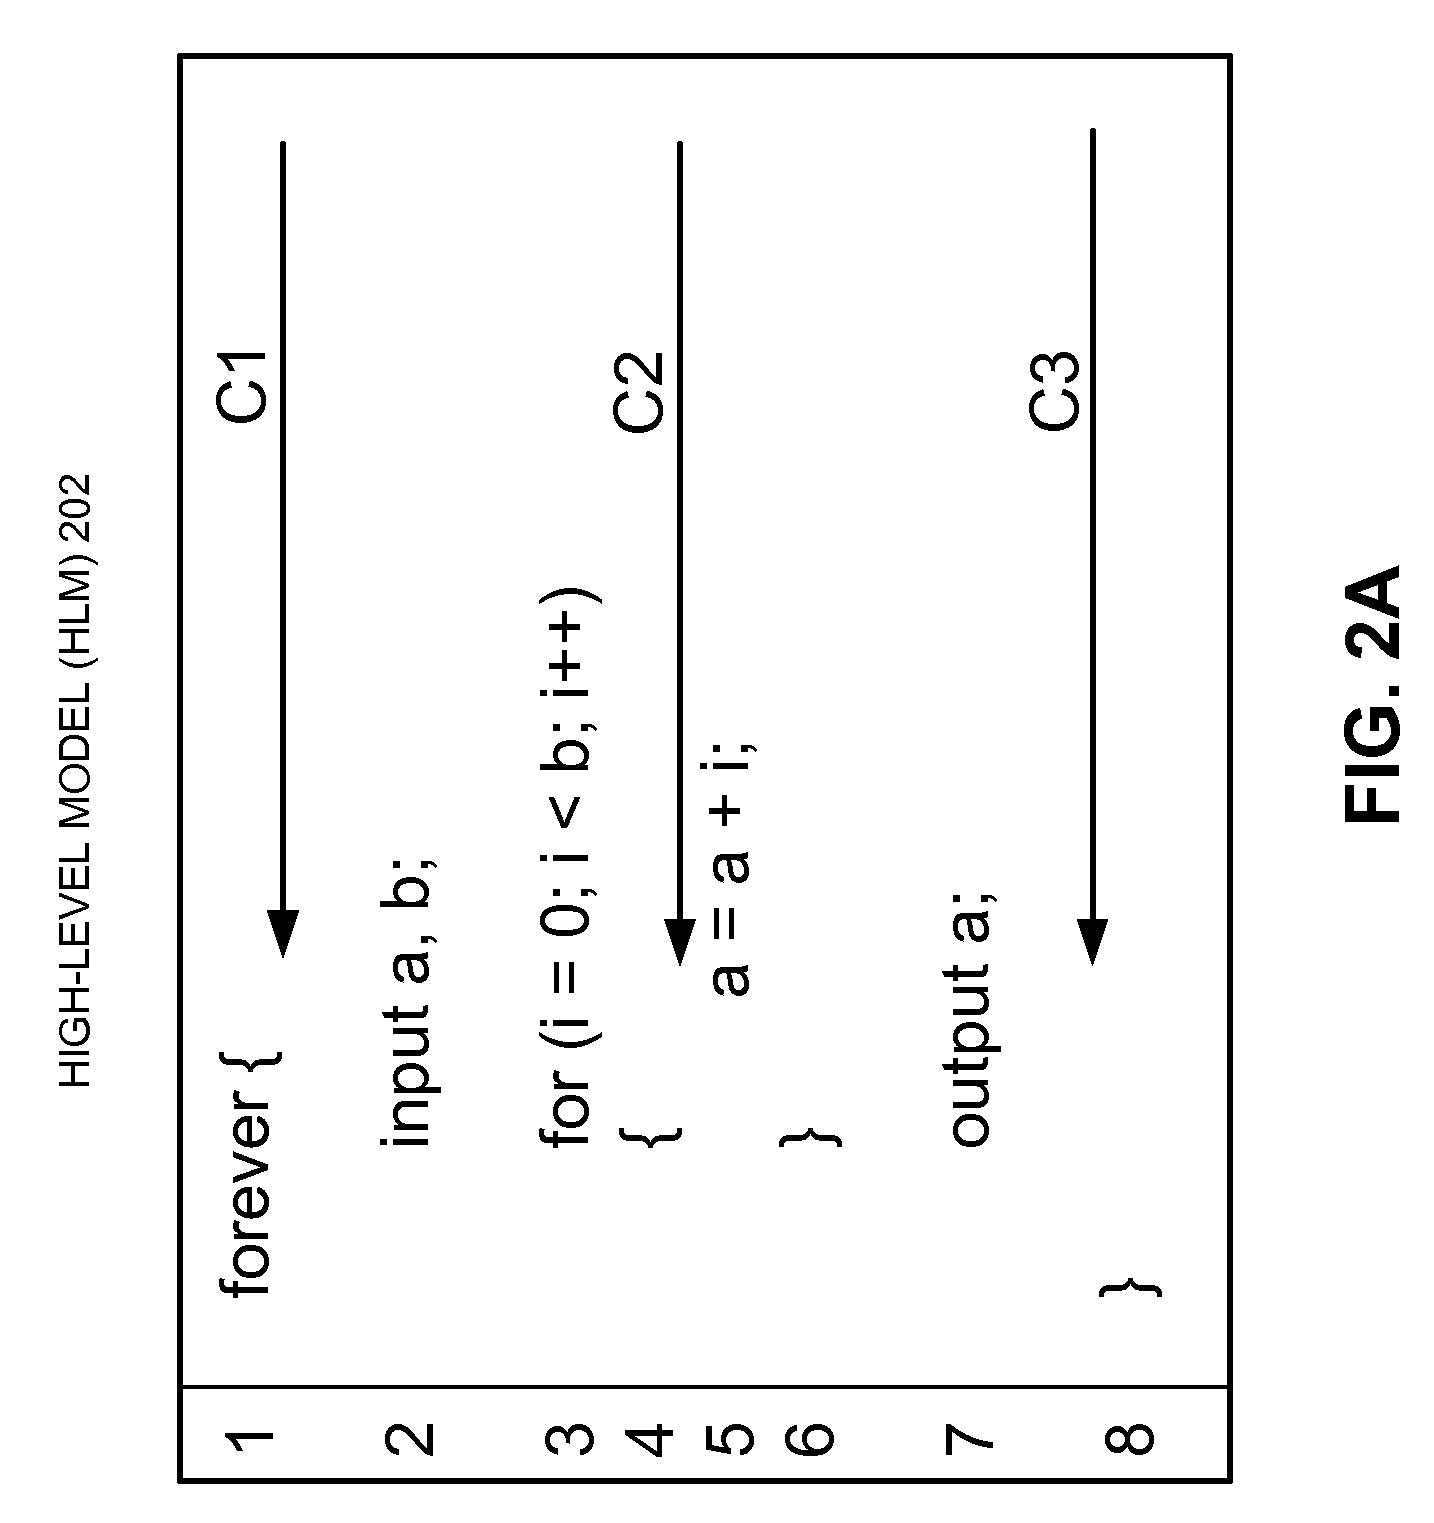 Formal equivalence checking between two models of a circuit design using checkpoints